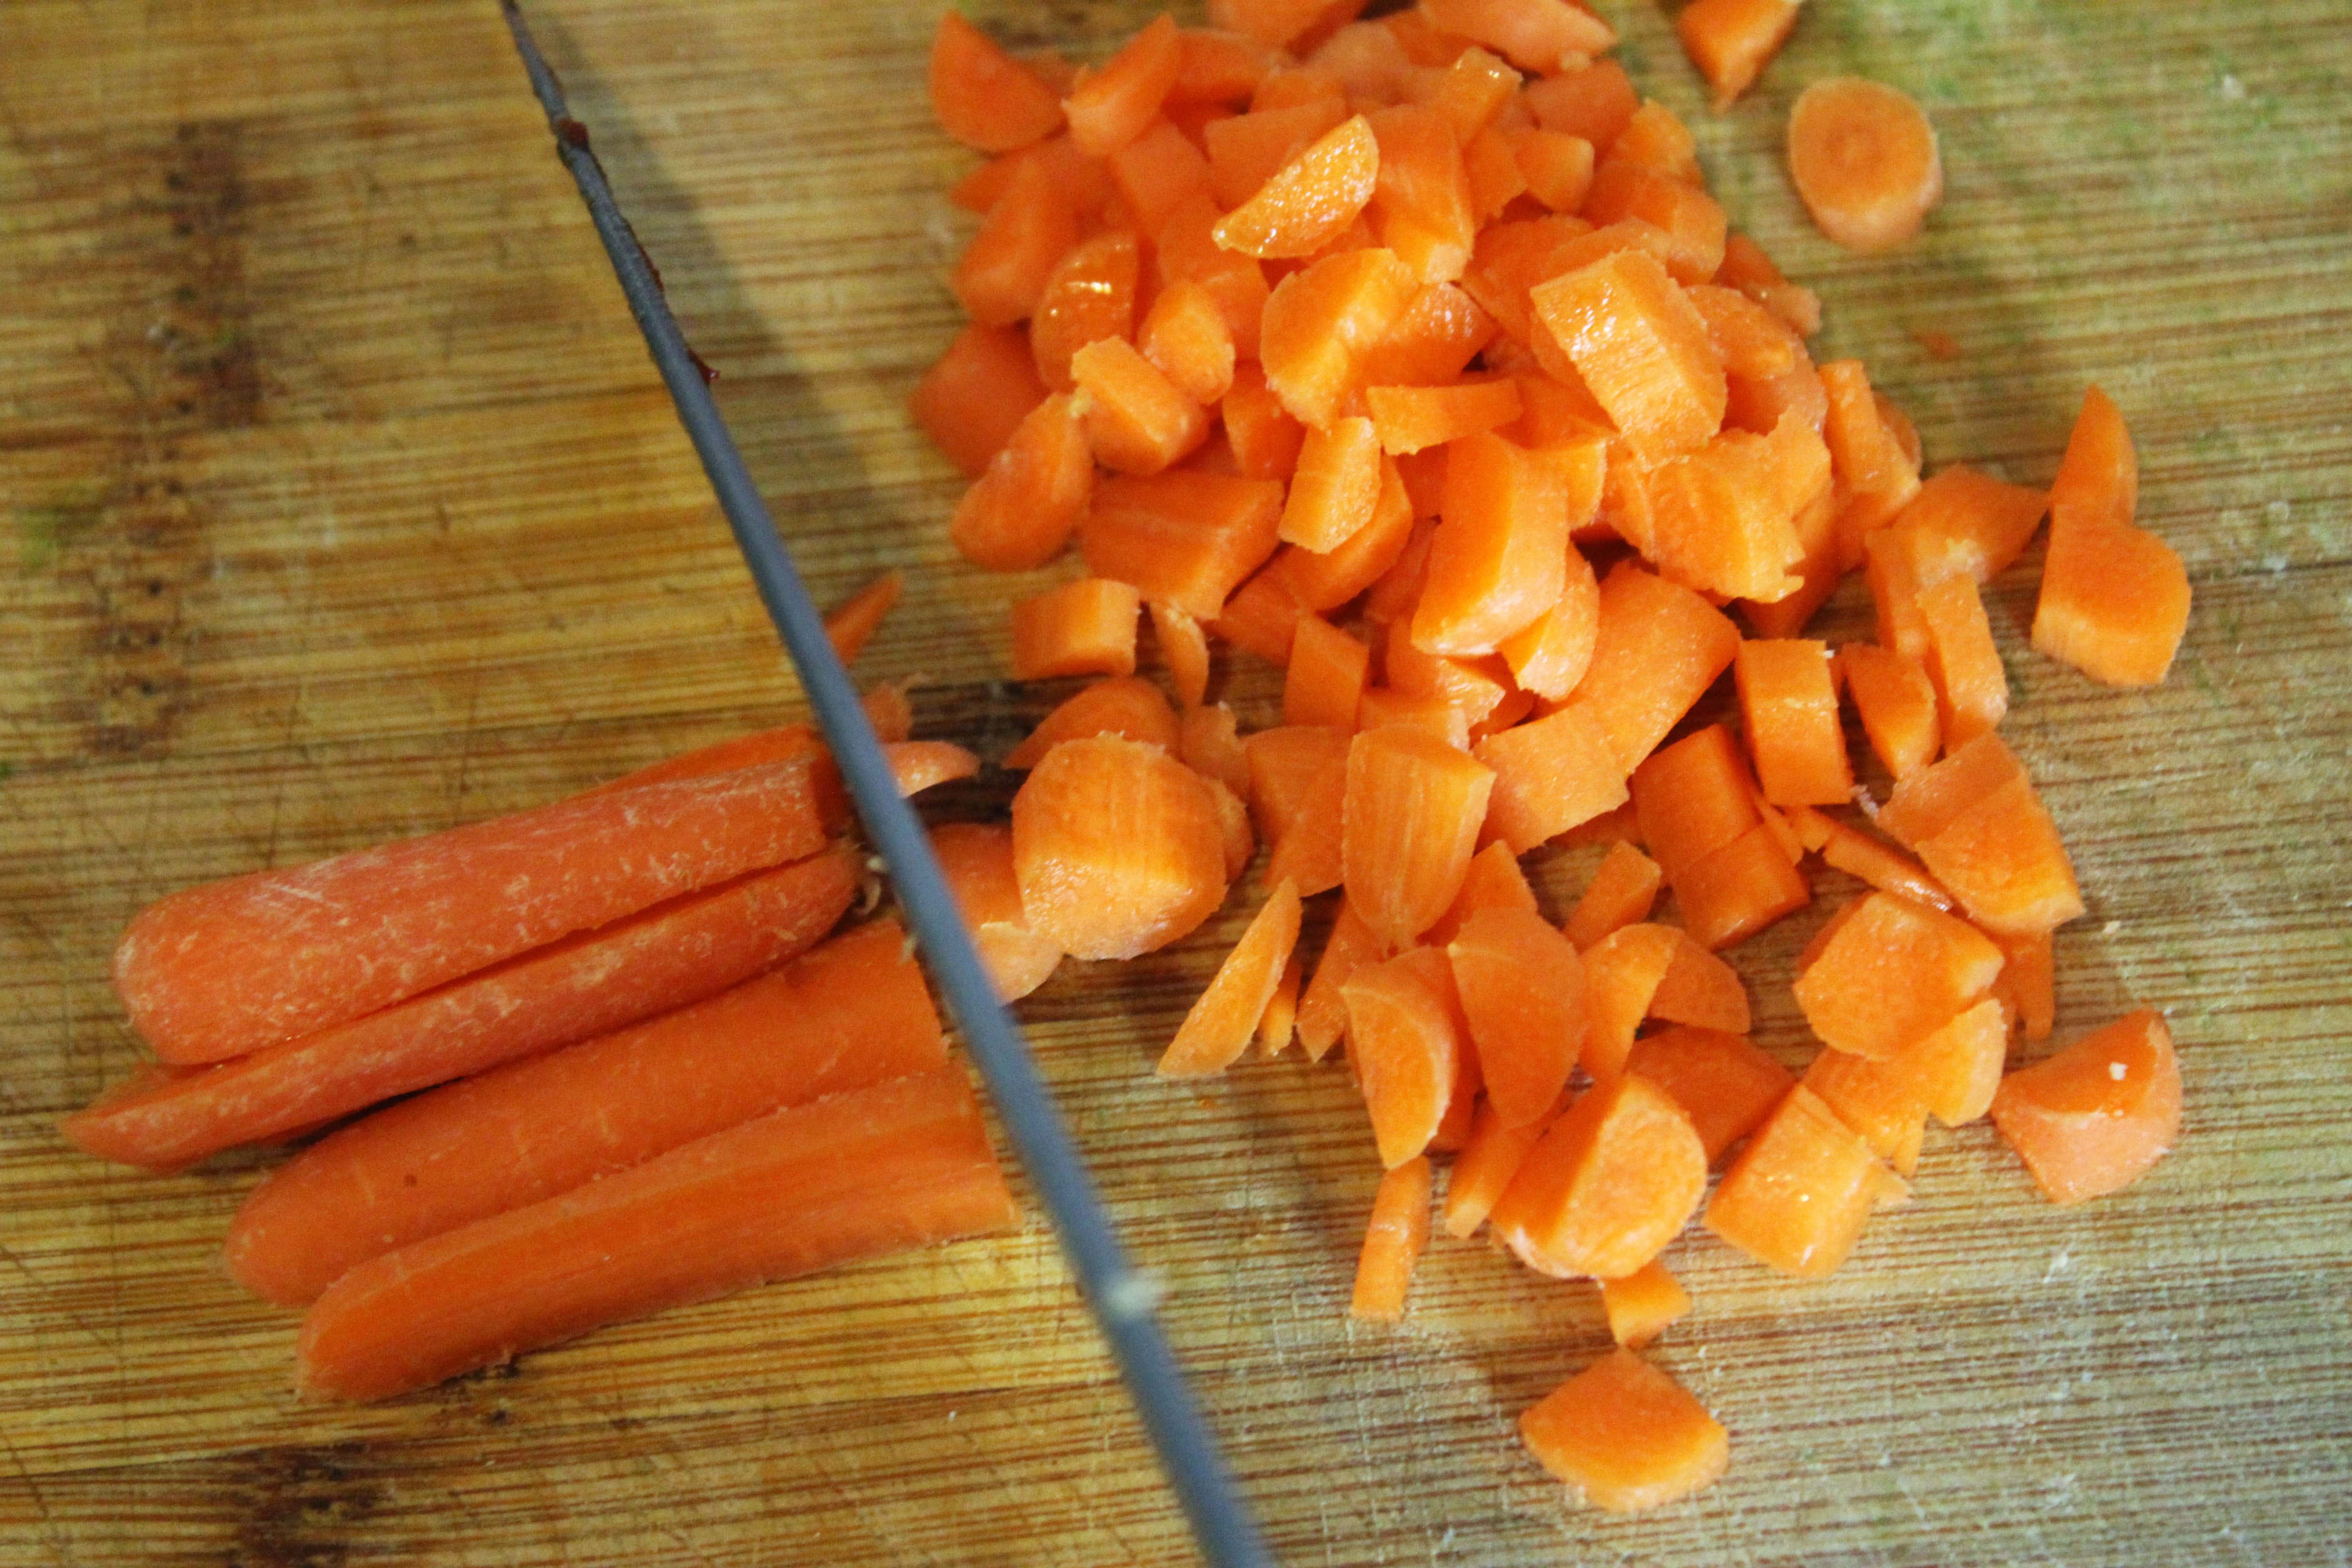 Cut carrot strips into small bits